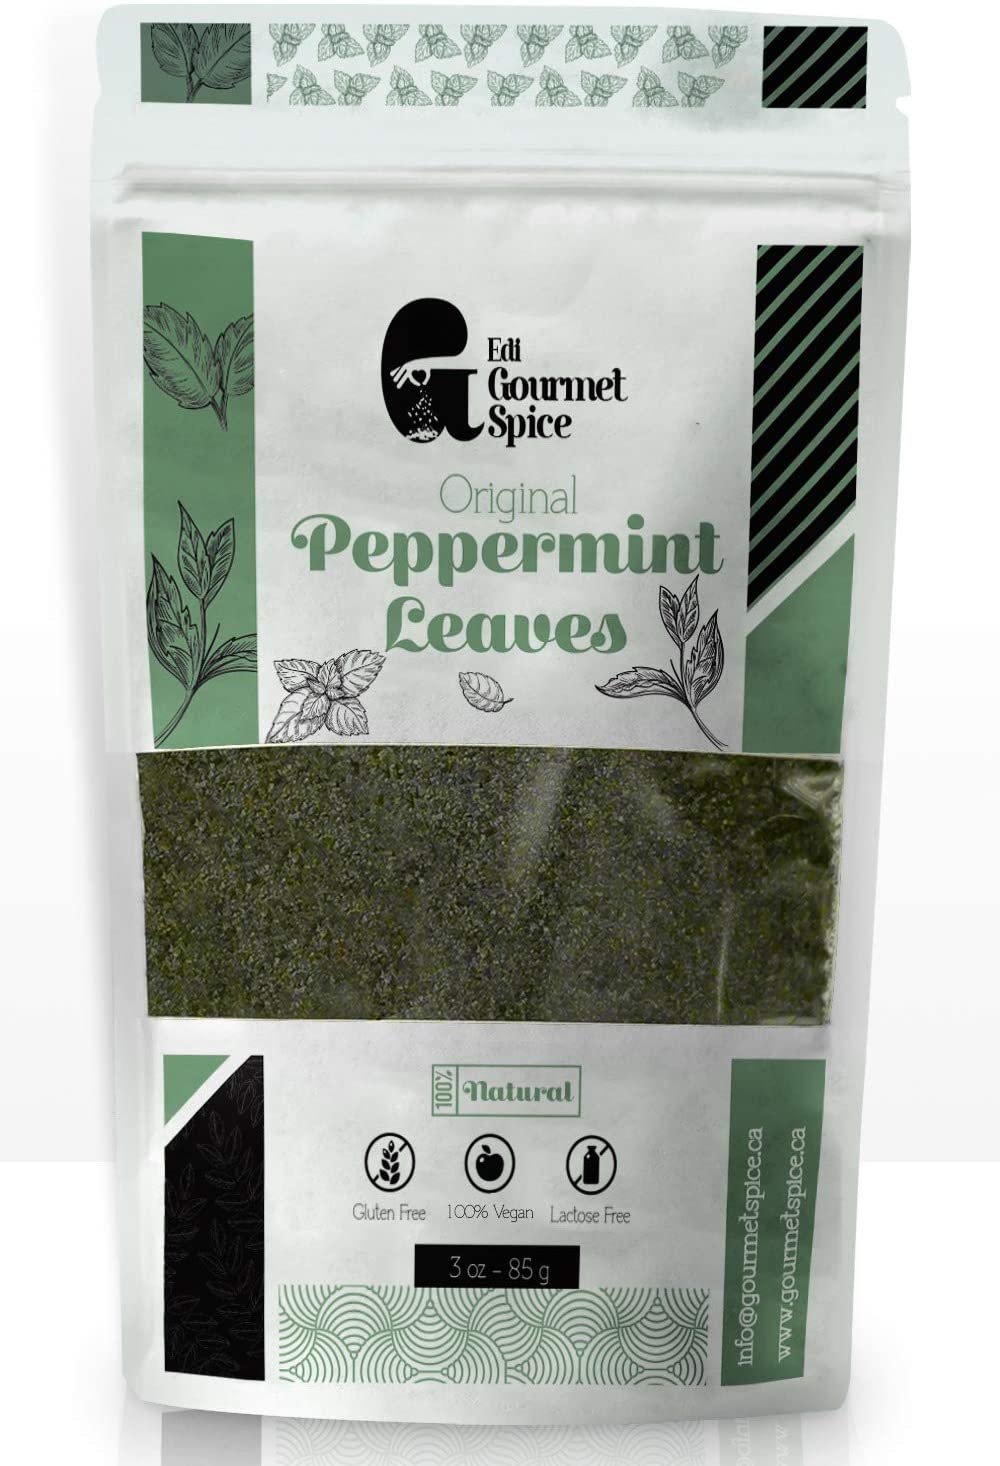 Edi Gourmet Spice Dried Peppermint Leaves